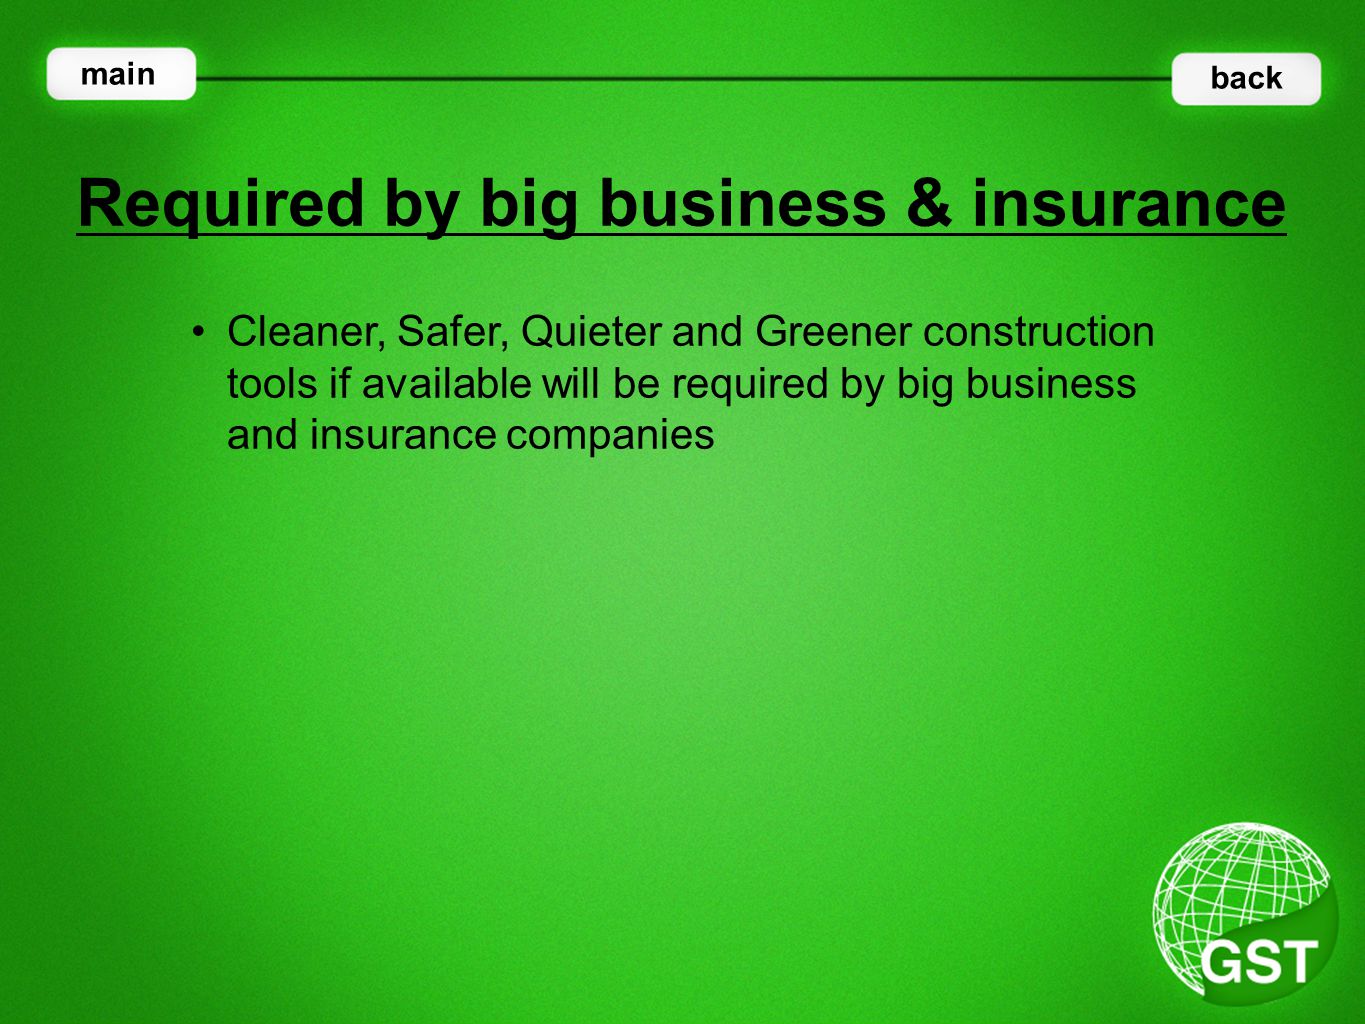 Cleaner, Safer, Quieter and Greener construction tools if available will be required by big business and insurance companies Required by big business & insurance main back